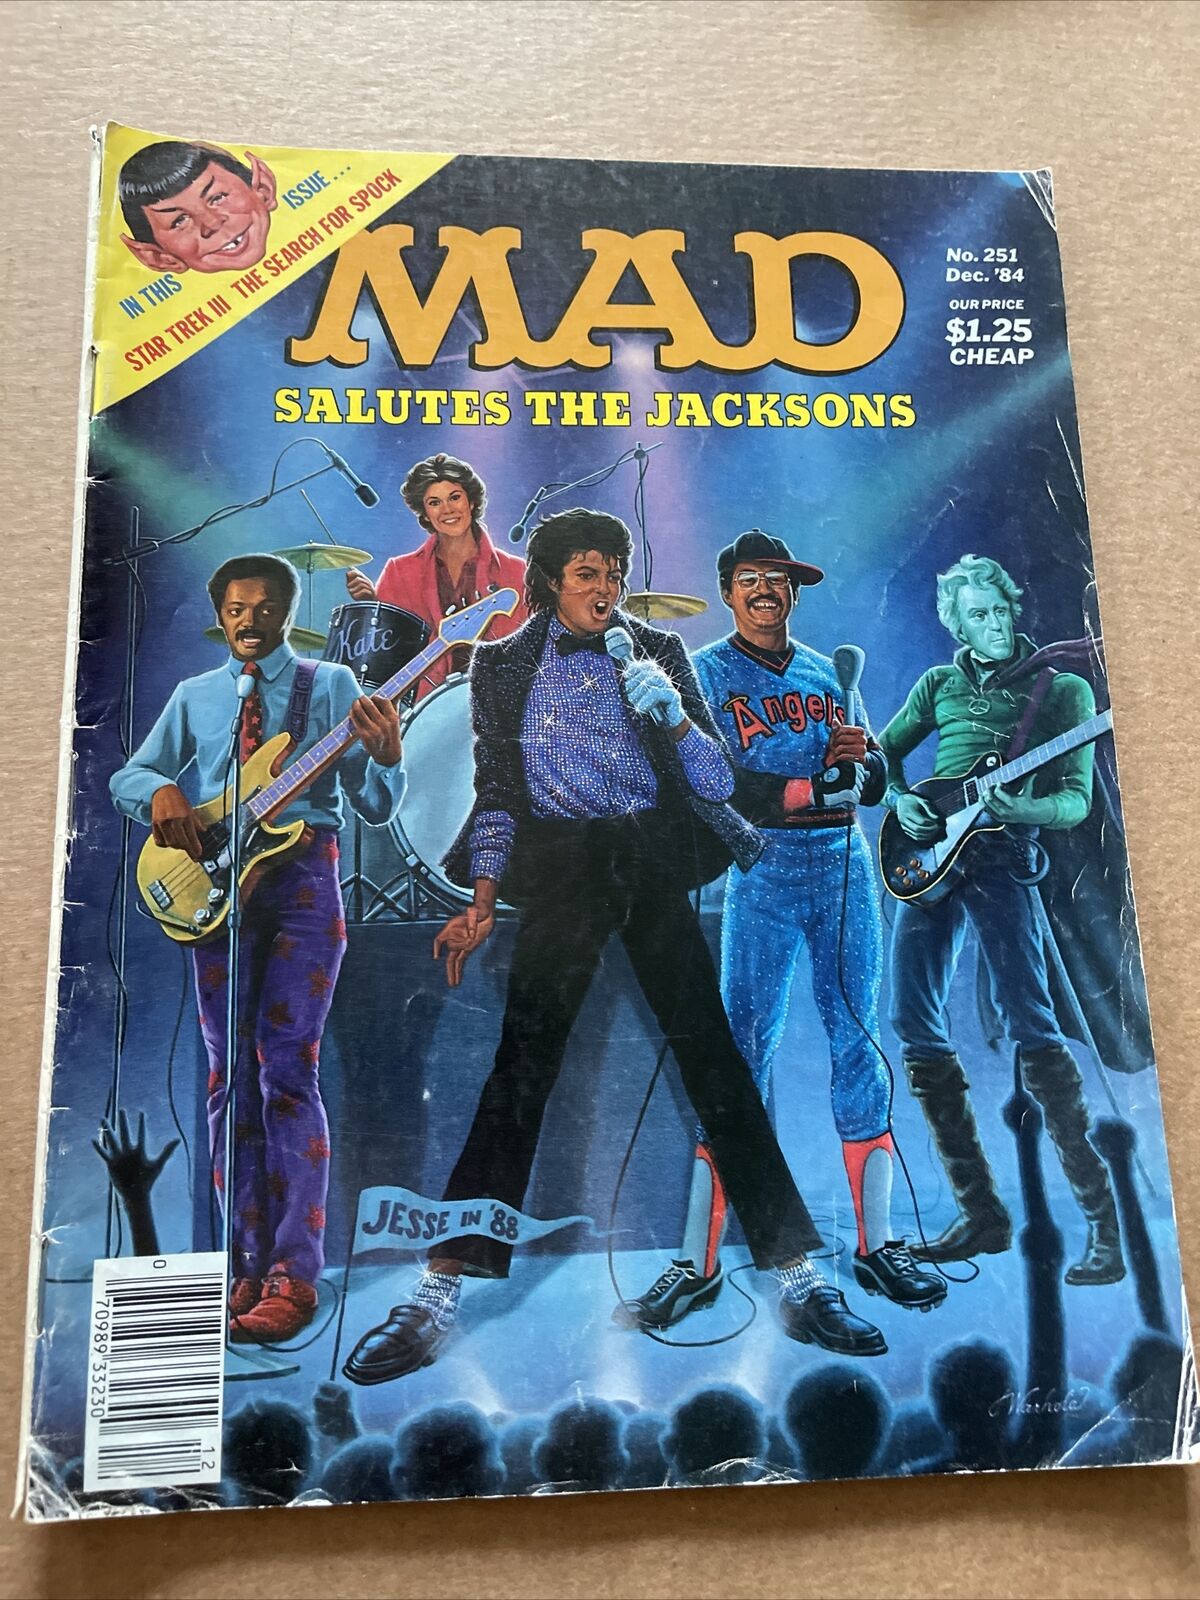 Mad Magazine #251 December 1984 Salutes The Jacksons bARGAIN Shipping included